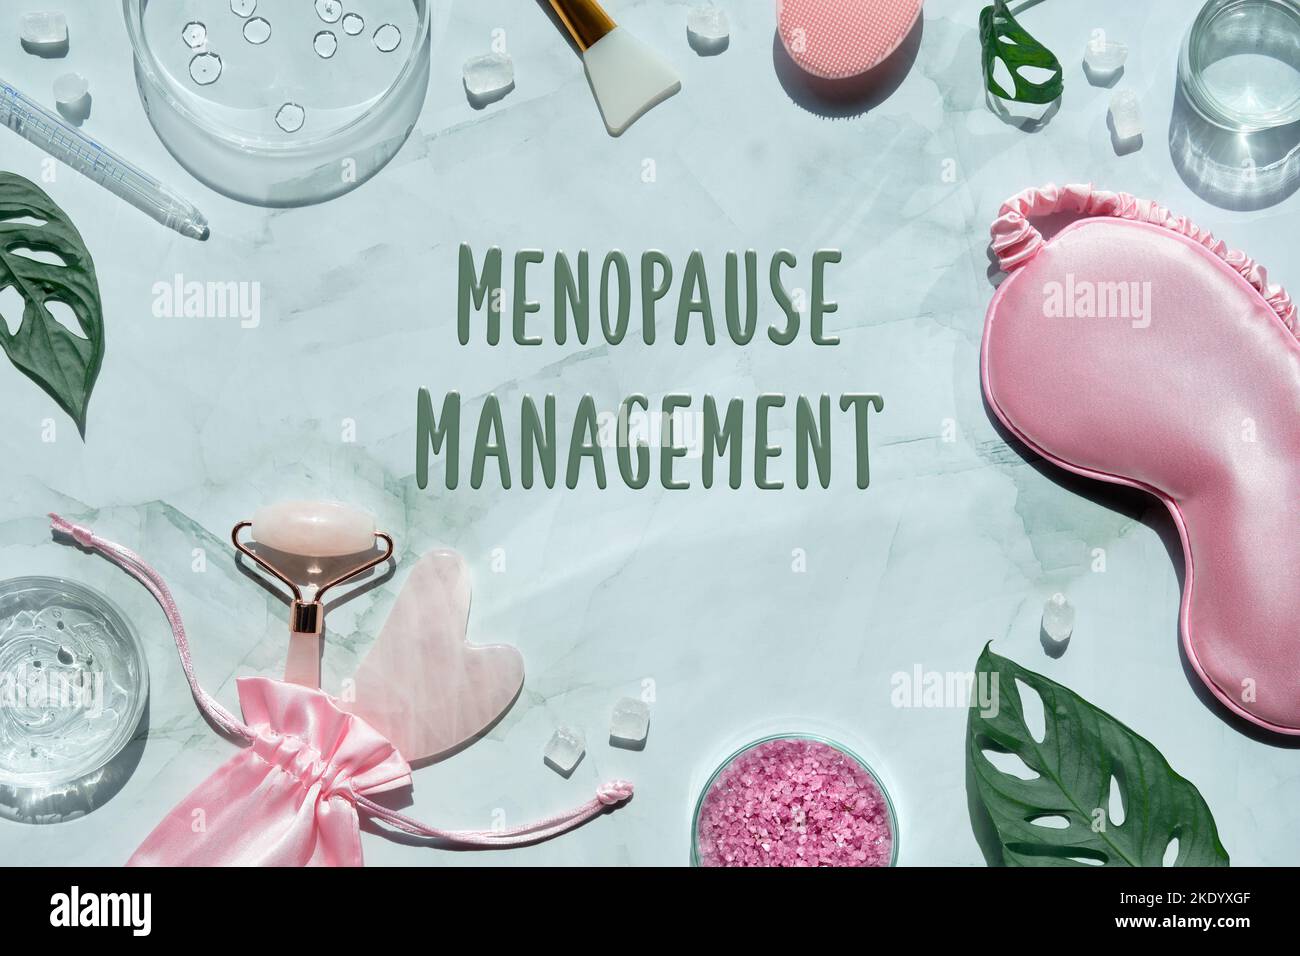 Menopause management text on wellness flat lay. Pink stone facial roller and guasha stone on mint green with monstera leaves. Towel, sleep mask Stock Photo